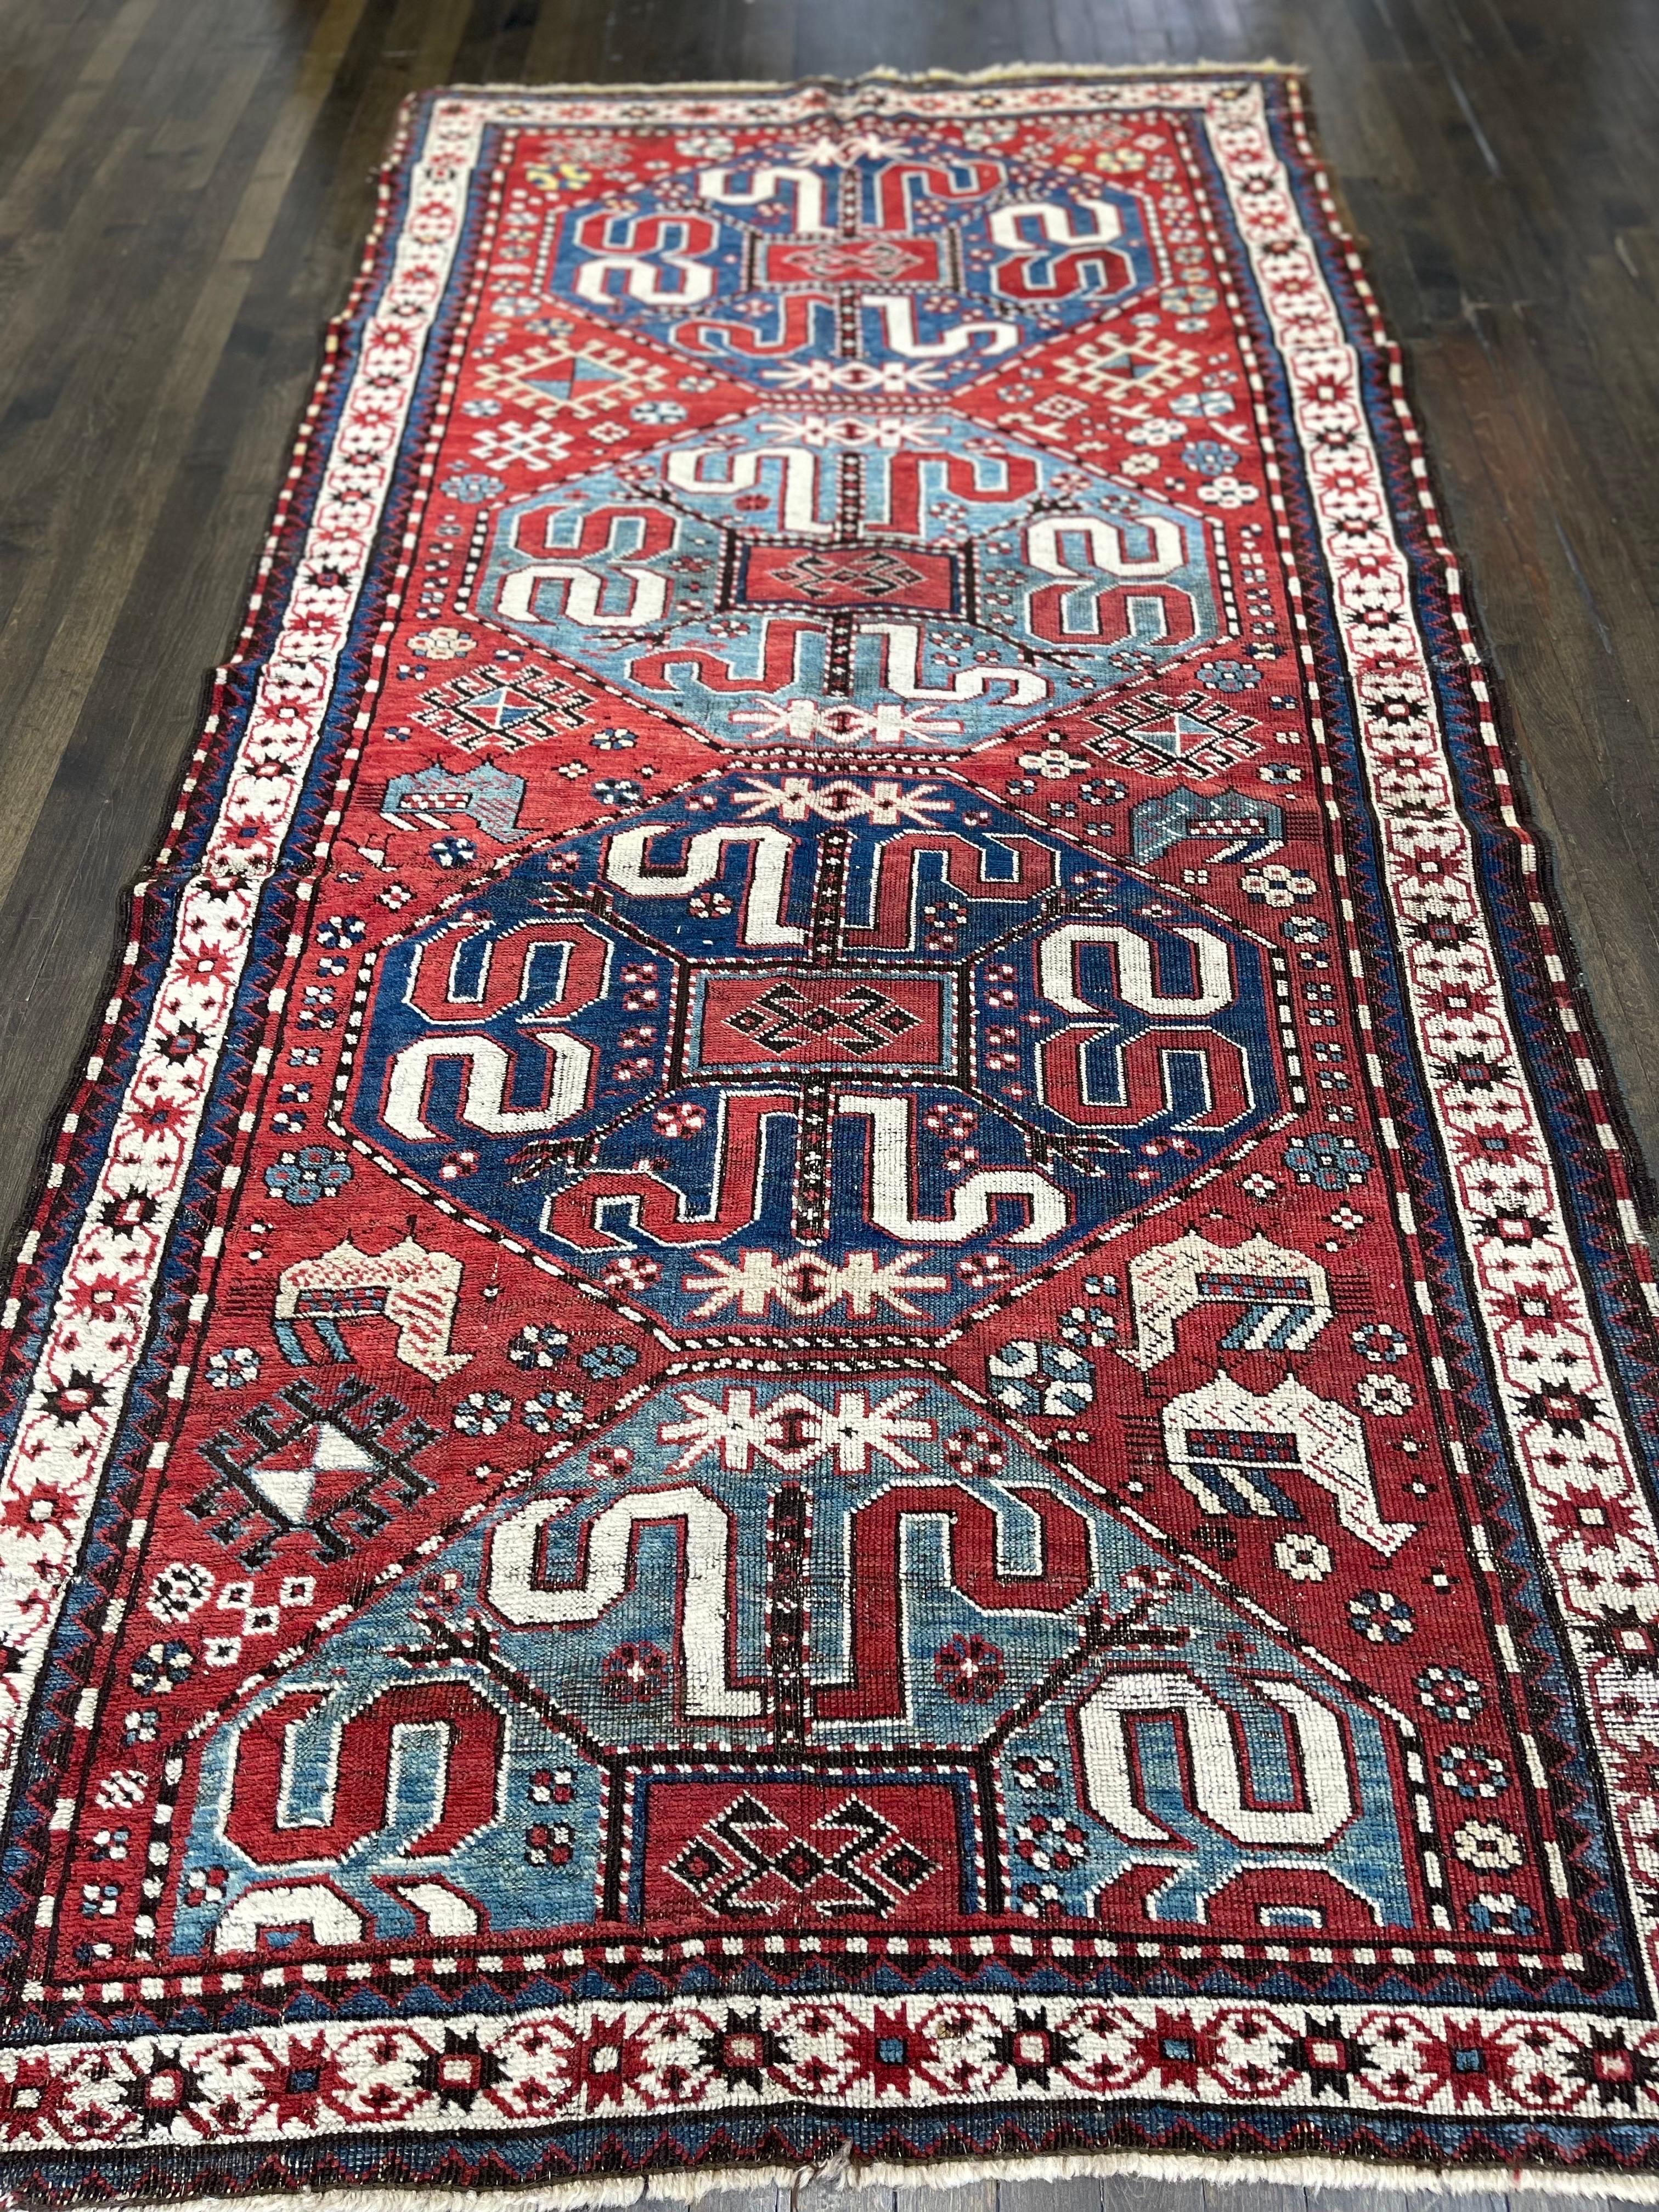 A very handsome example of an antique Kazak attributed to a village in the north-west part of Karabagh,this distinctive group of rugs are known as cloud-band Kazak. The adjectival description refers to the worm-like configurations within the